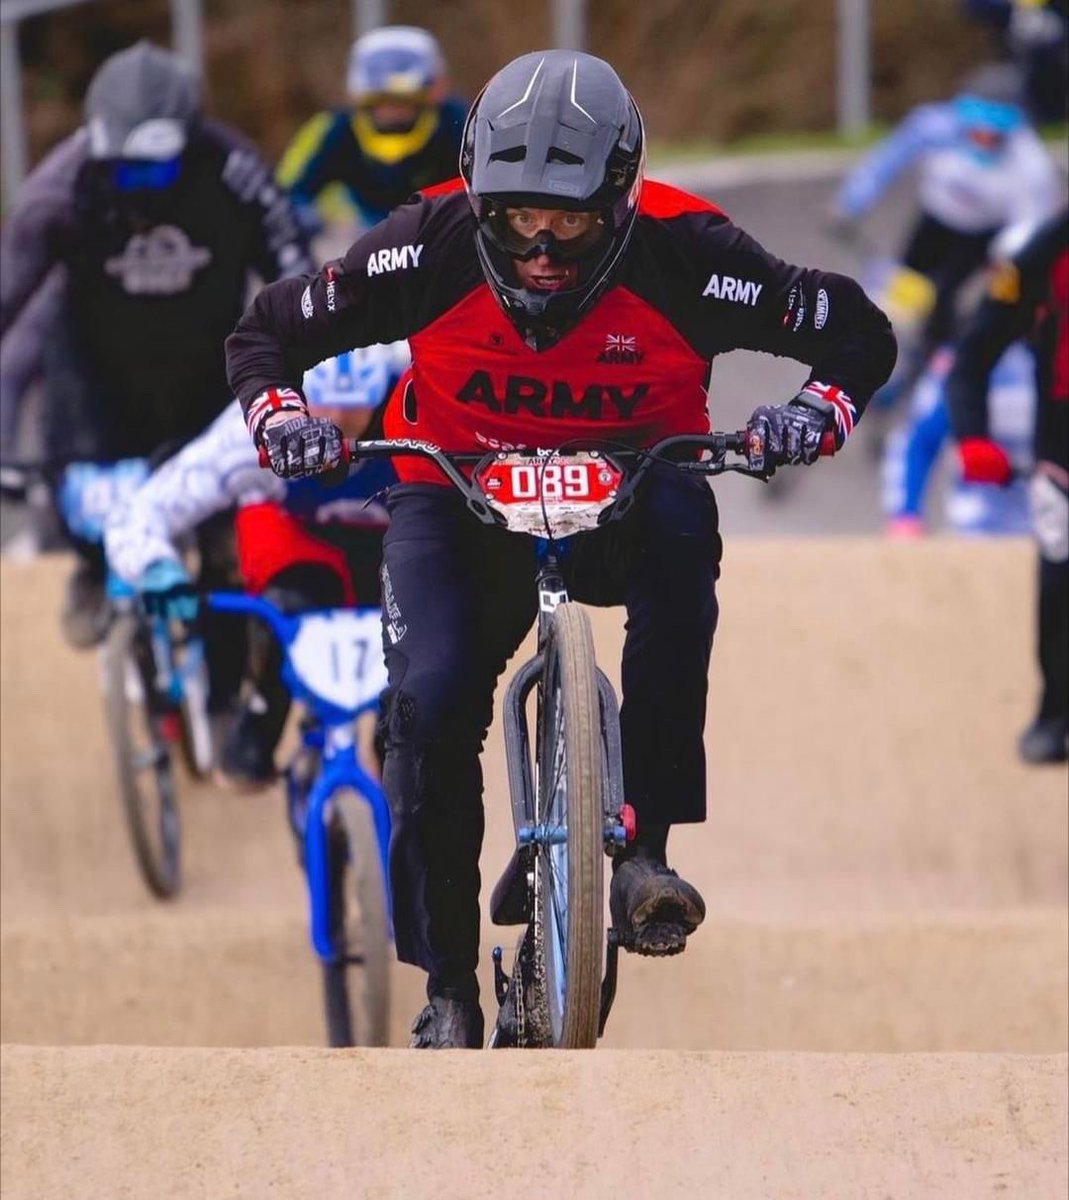 Best of luck to Lt Col Matt Swales who is racing this week in the BMX World Championships in Rock Hill, USA 📷📷 He will be competing in the 40-44 cruiser category. #inspiringsoldierstocycle